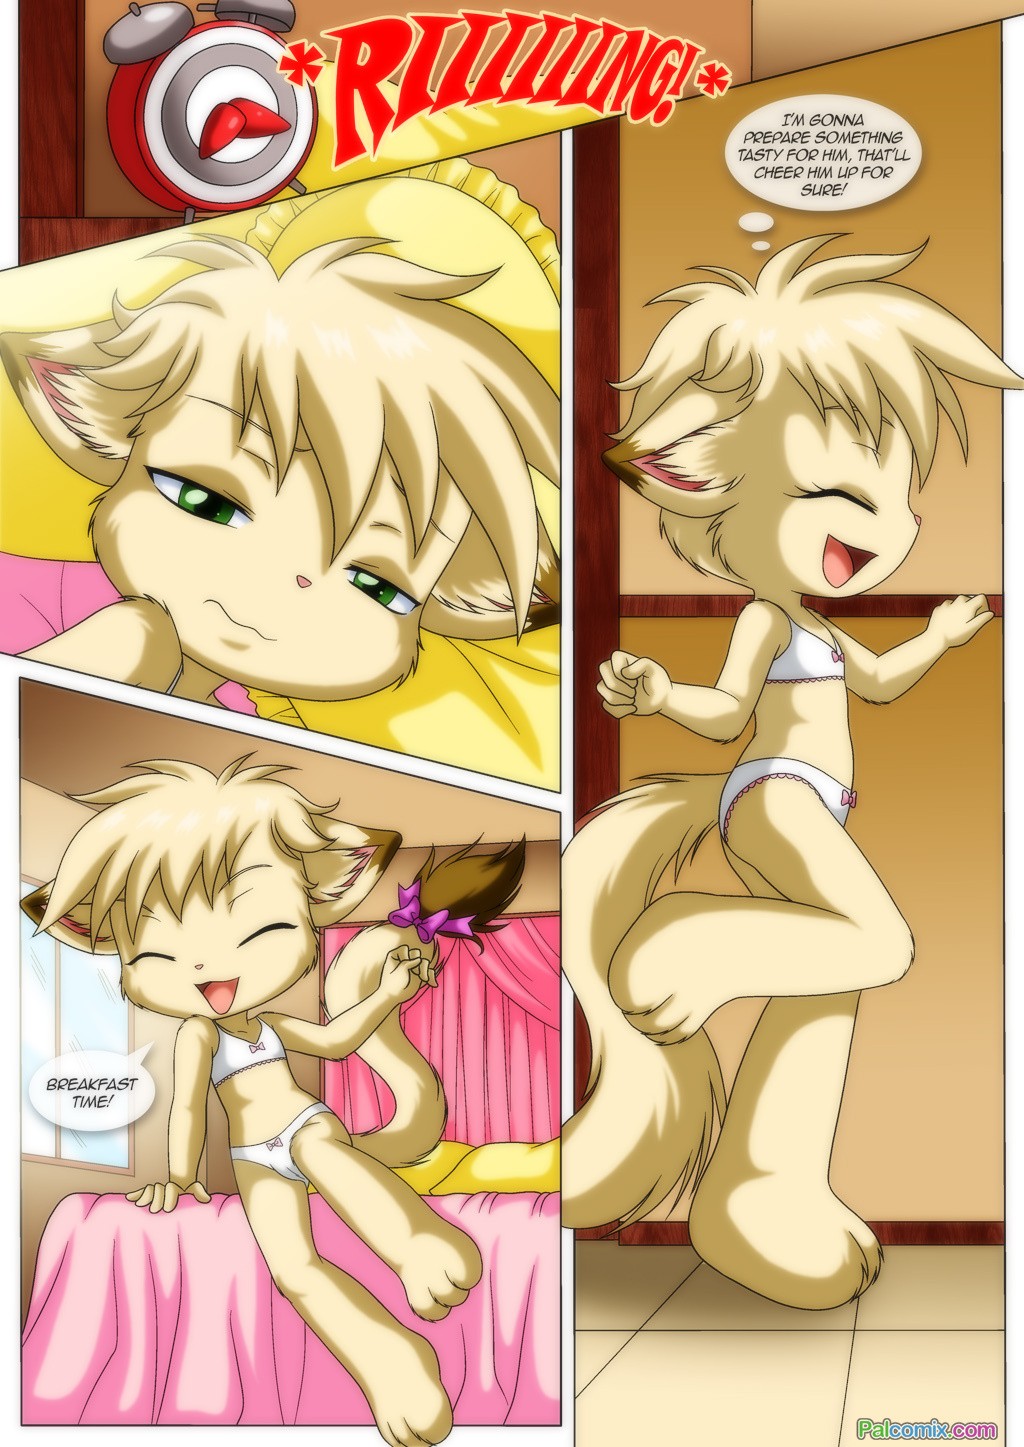 Little Tails 4: Cherry Blossom Girl porn comic picture 5